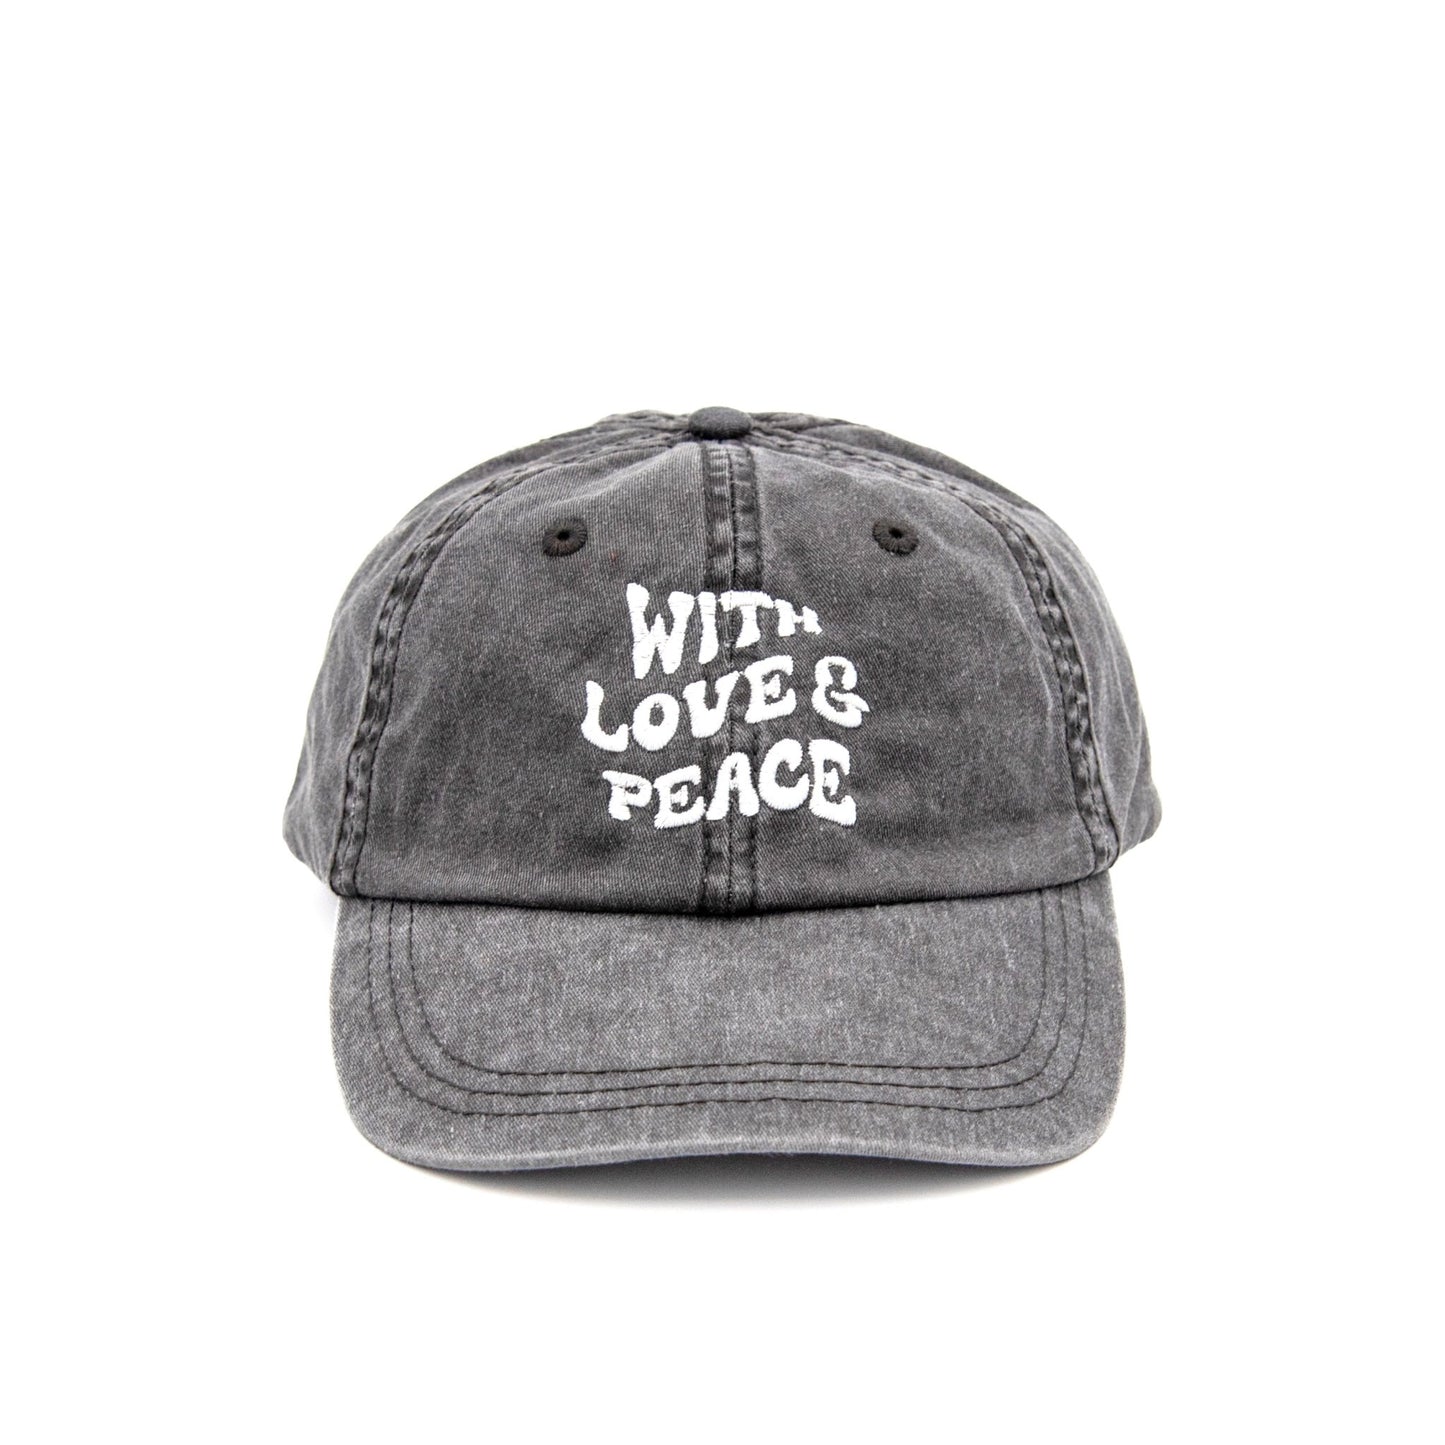 With Love And Peace Cap Wear The Peace Dad Caps Washed Gray